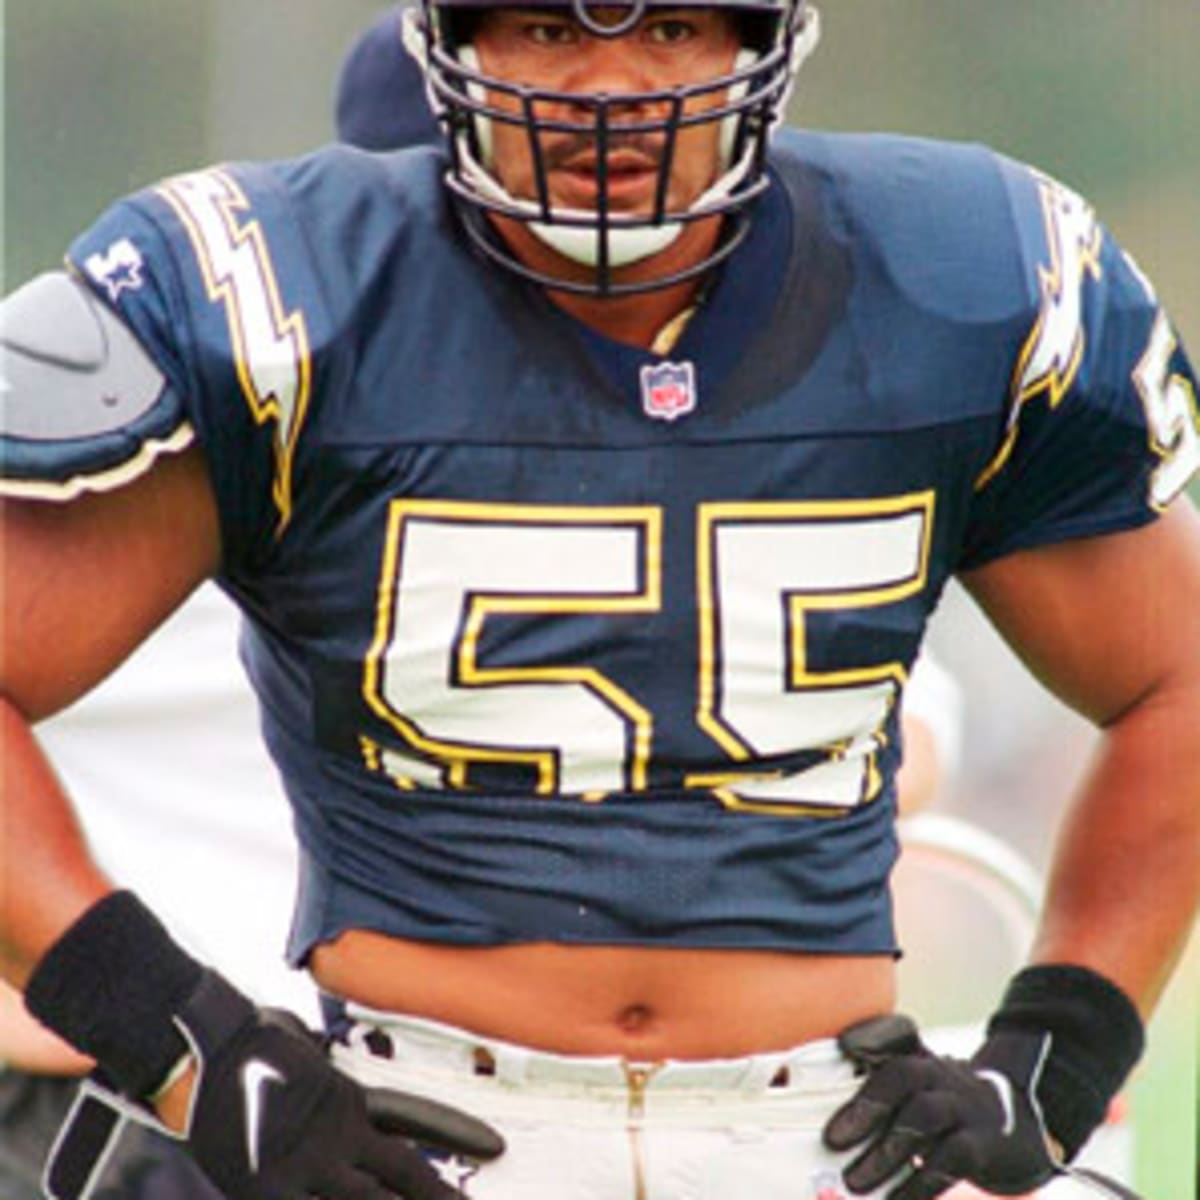 Paul Daugherty: We don't know athletes like Junior Seau, just